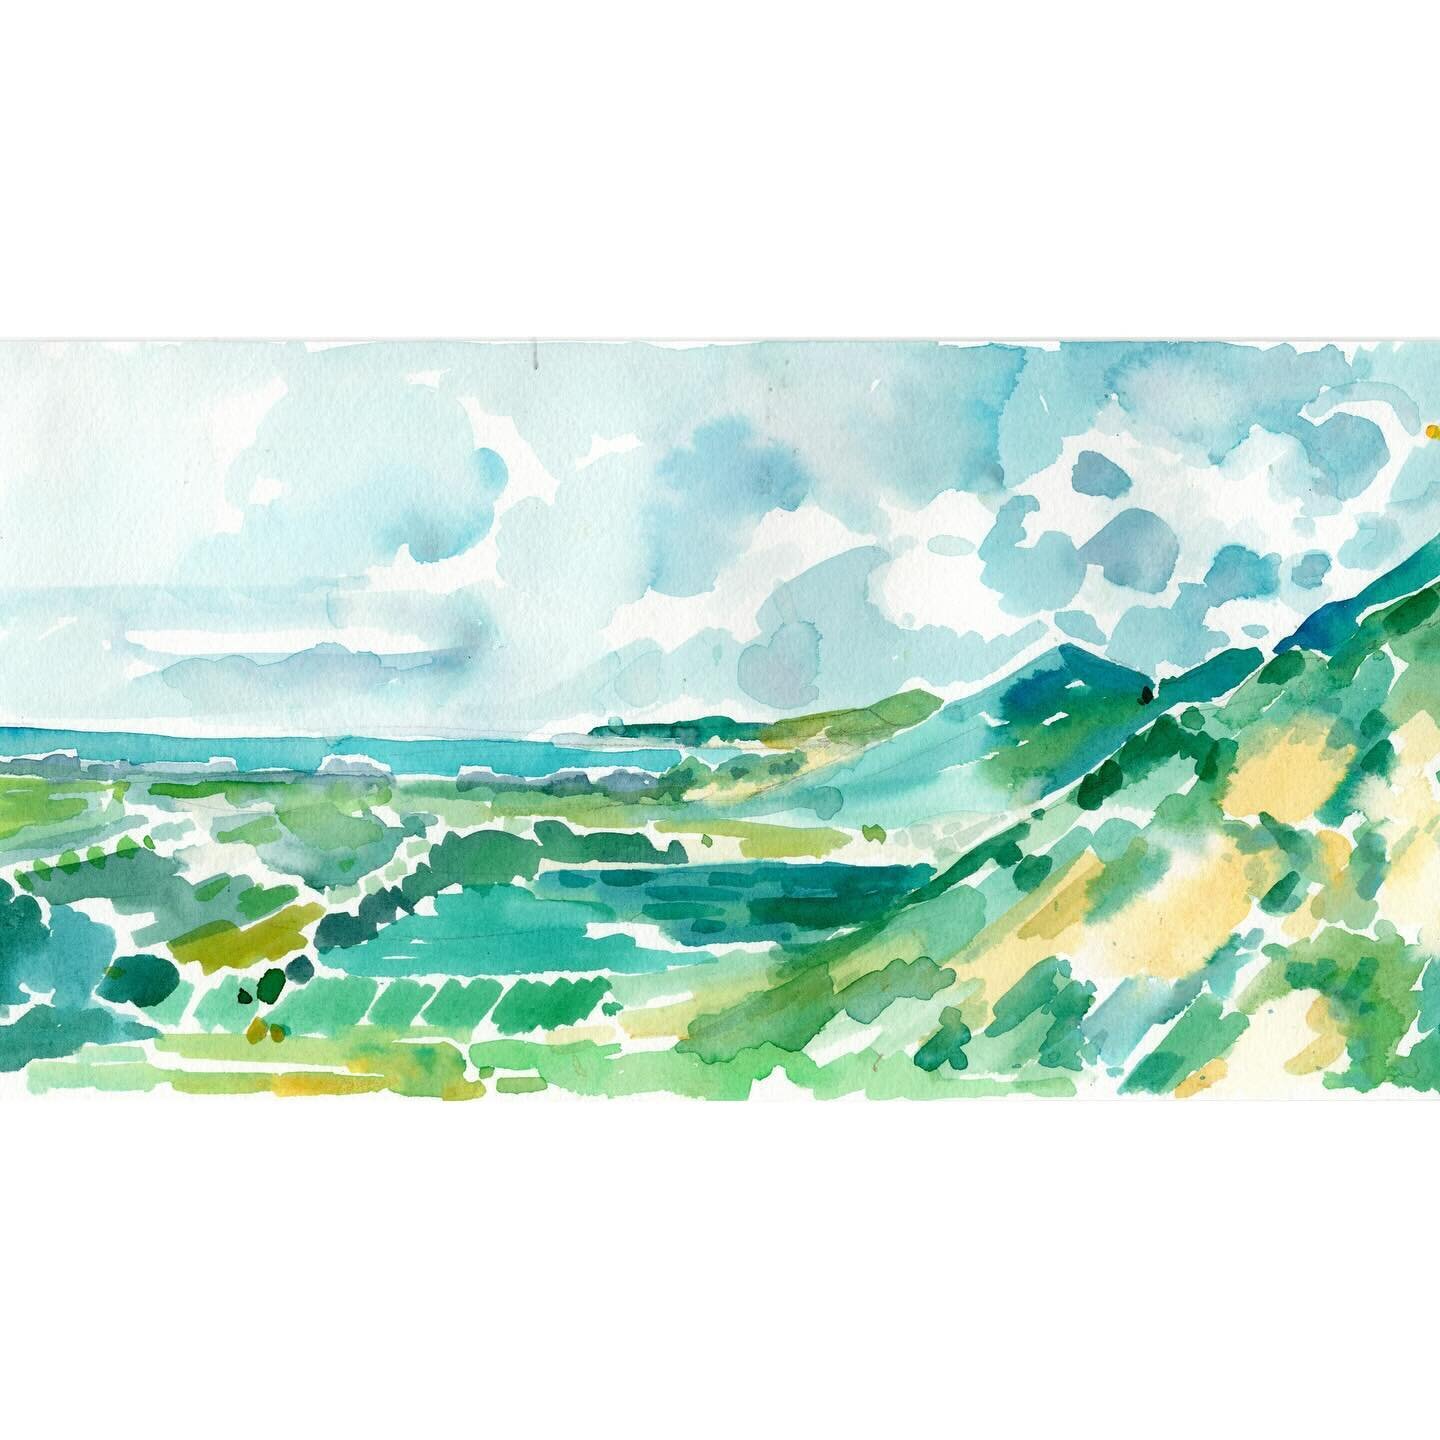 View from my favorite hike in town. Just added this and other original paintings to my online shop 🌴 http://www.jessica-june.com/originals
.
.
.
.
.
.
.
.
. #watercolor #illustration #santabarbara #sblife #805living #805 #pleinairpainting #santabarb